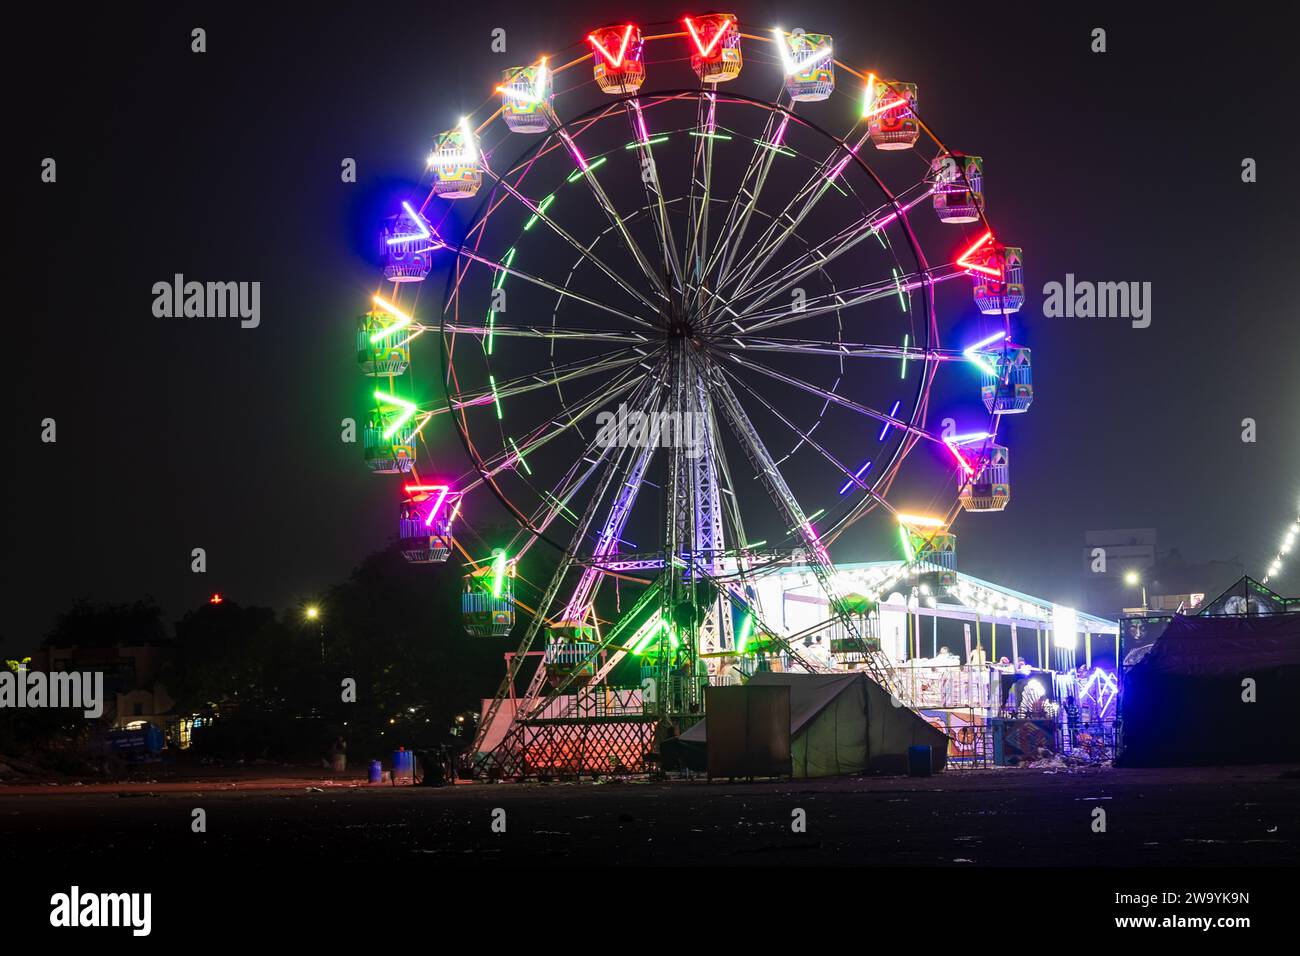 merry go round swing at night with colorful light at city fair ground from different angle Stock Photo